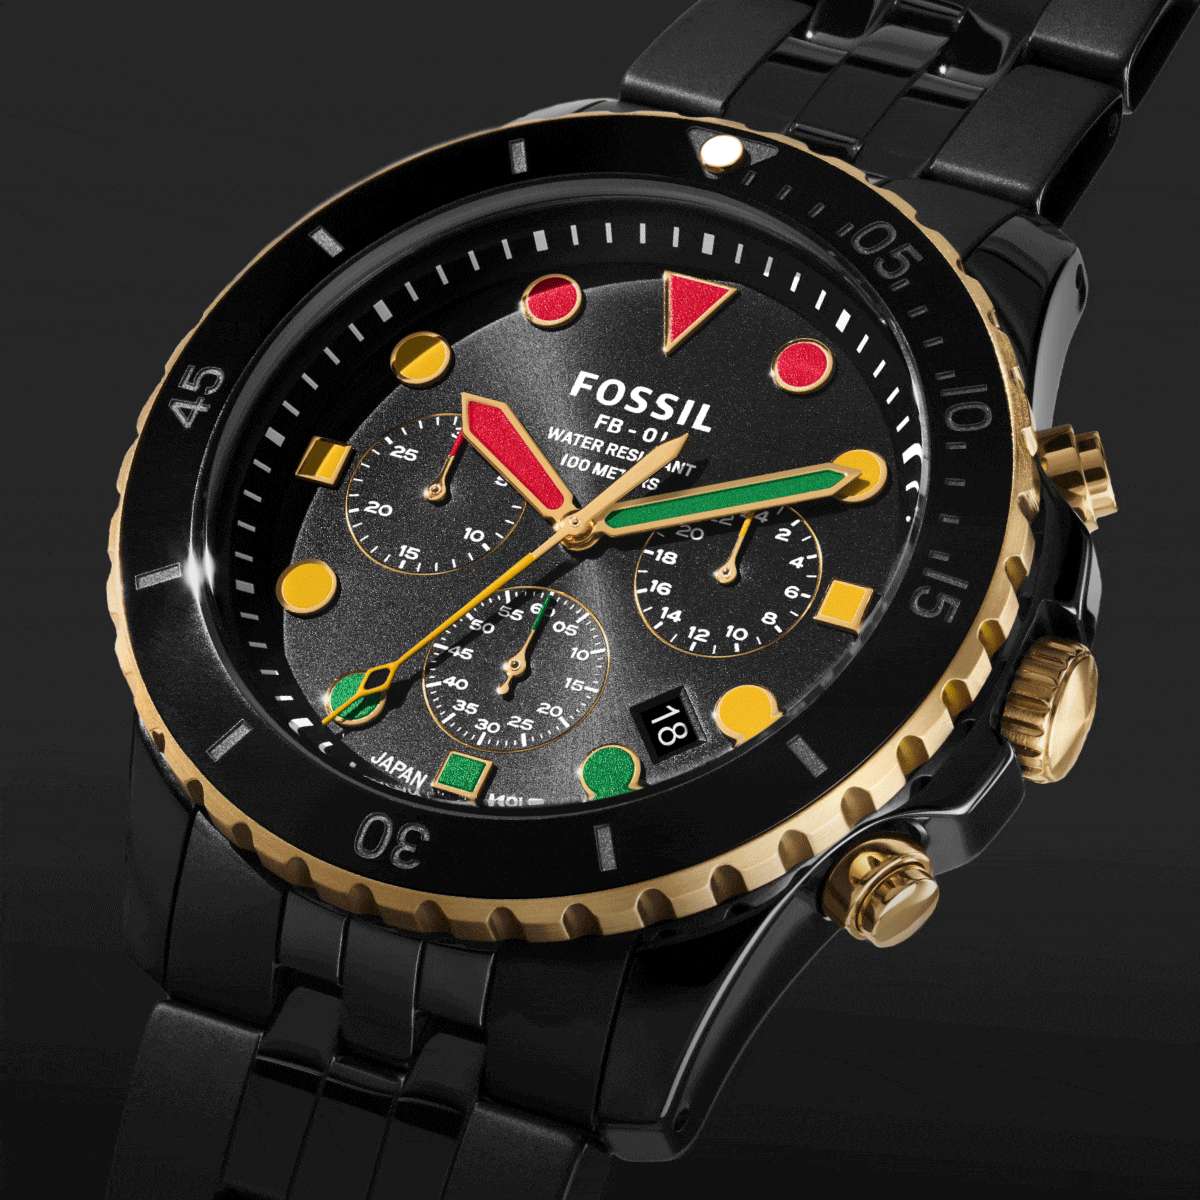 The special-edition black ceramic FB-01 feauturing red, green and yellow indices and minute hands in honor of Black History Month.